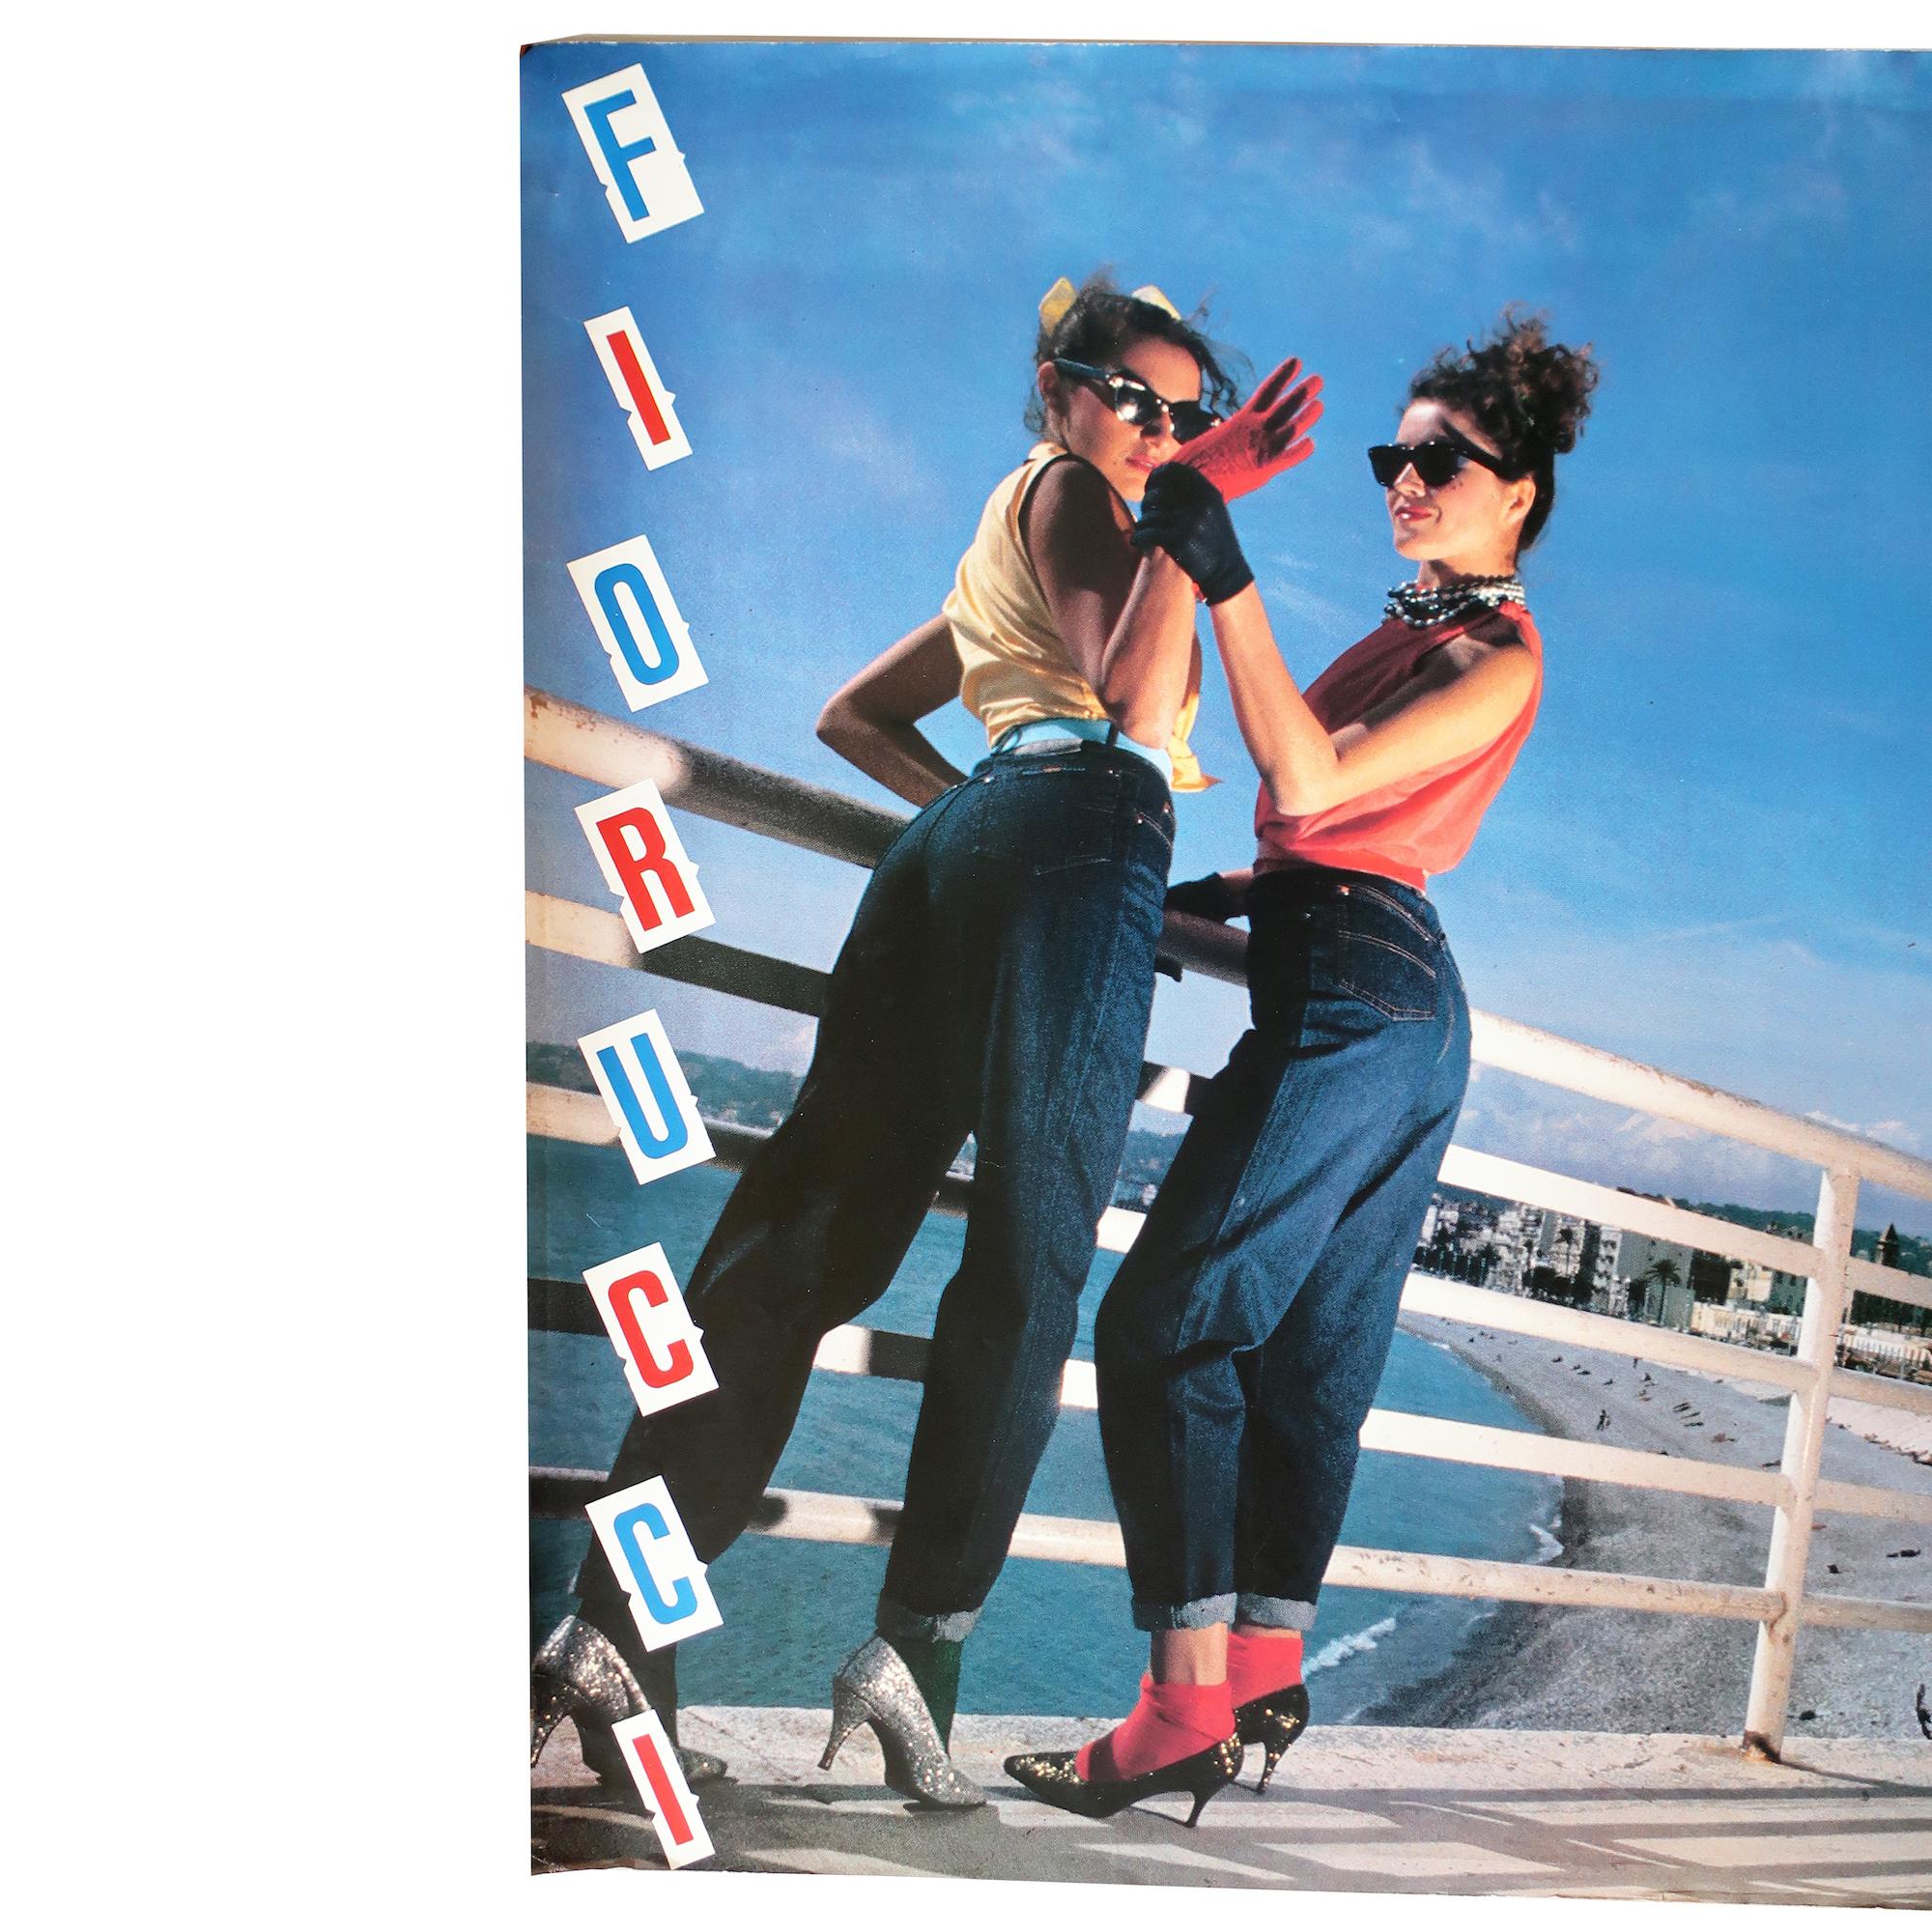 A vintage and rare Fiorucci poster with two women in high heels and jeans waving while a motorcyclist pulls up behind them on a pier by the sea.  The photo is beautifully lit and the poster includes slightly diagonal FIORRUCI lettering on the left